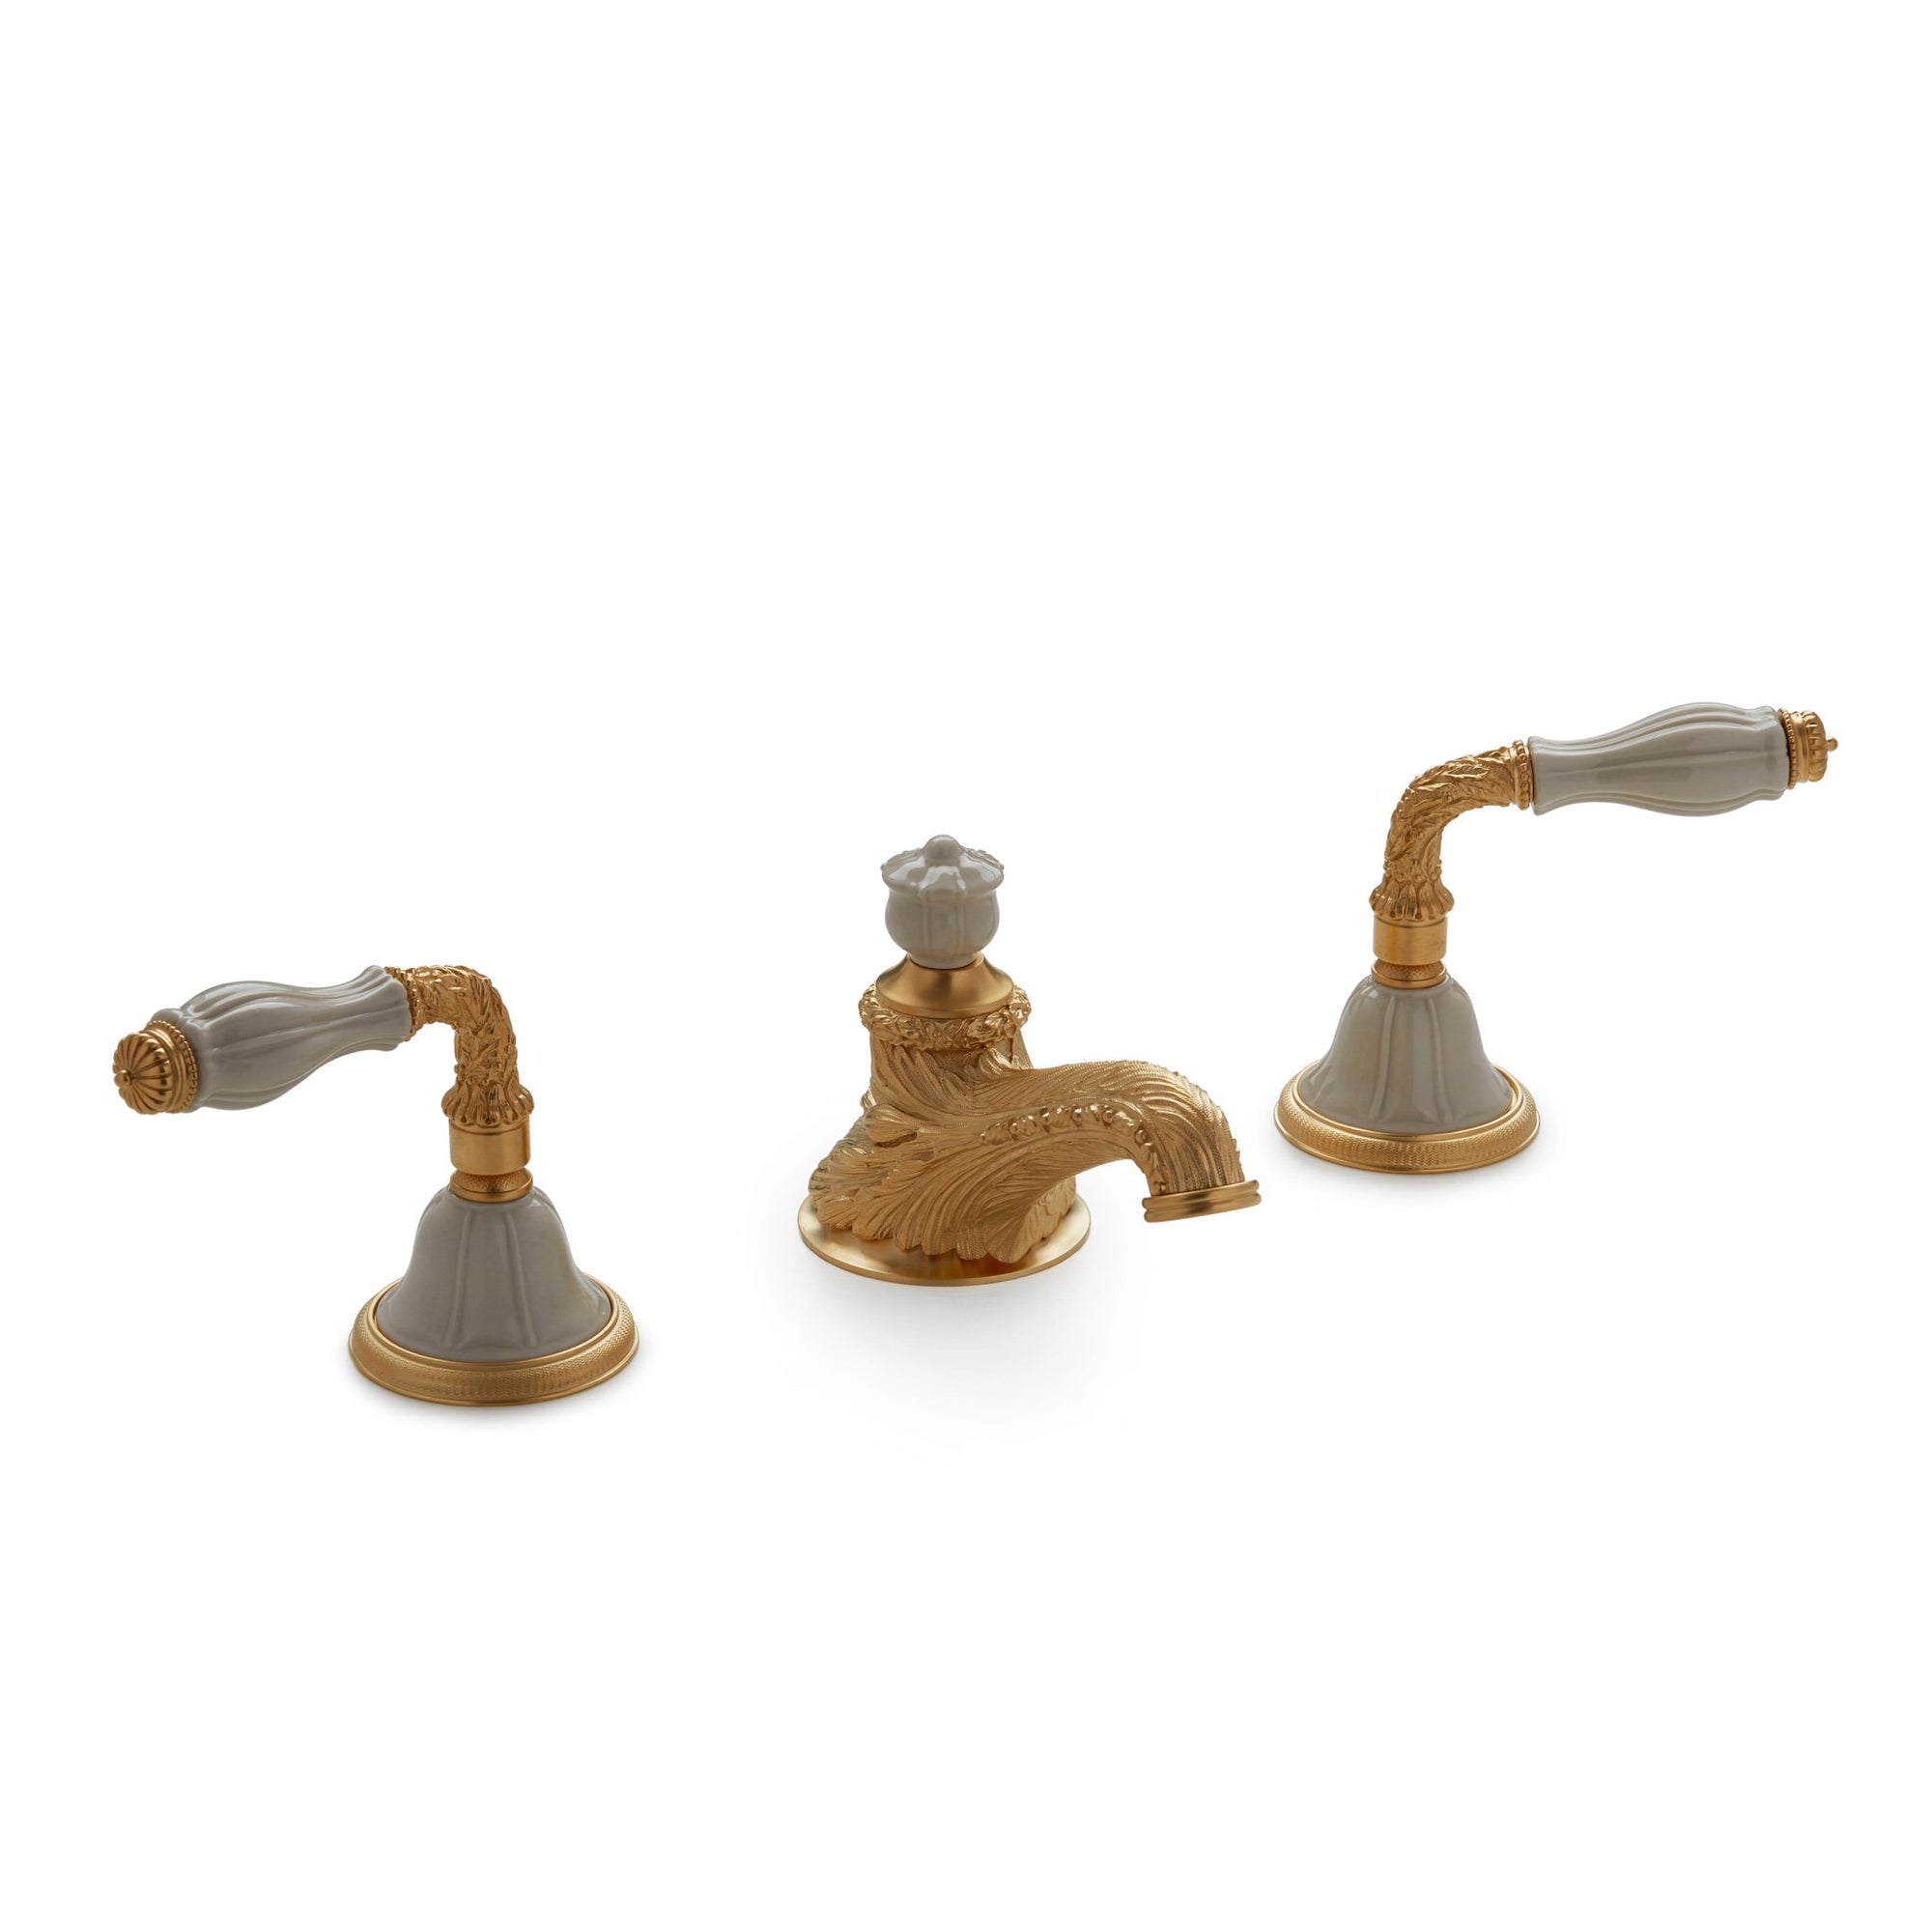 1030BSN819-03SD-GP Sherle Wagner International Scalloped Ceramic Laurel Lever Faucet Set in Gold Plate metal finish with Sand Glaze inserts